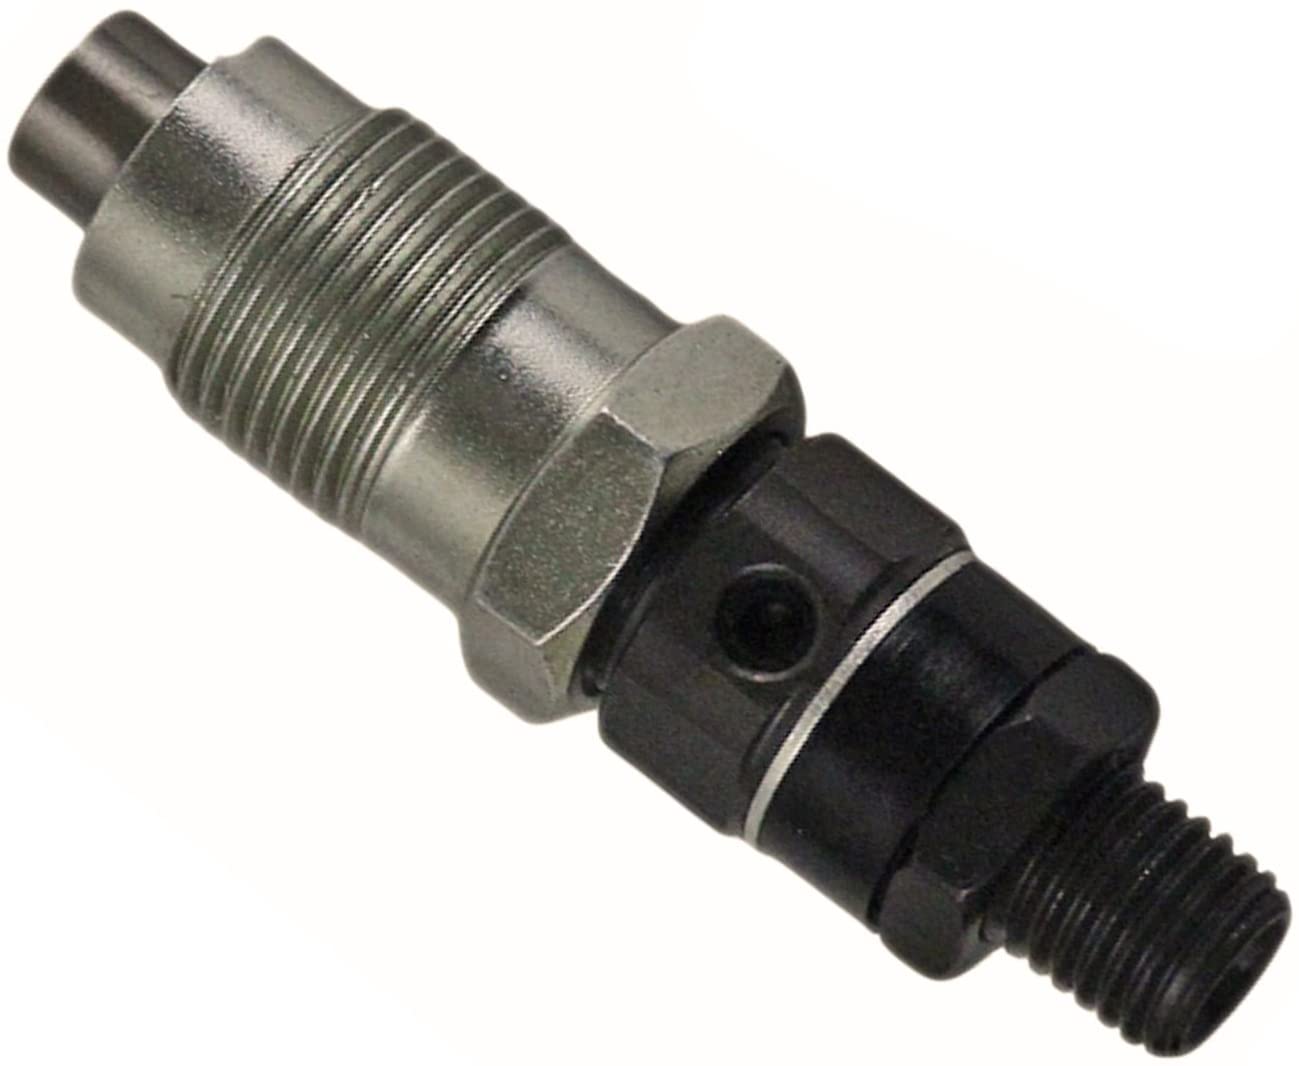 Fuel Injector Nozzle 7023120 6722147 for Bobcat 331 334 337 341 5600 645 743 751 753 763 773 7753 1600 S150 S160 S175 S185 T190 - KUDUPARTS